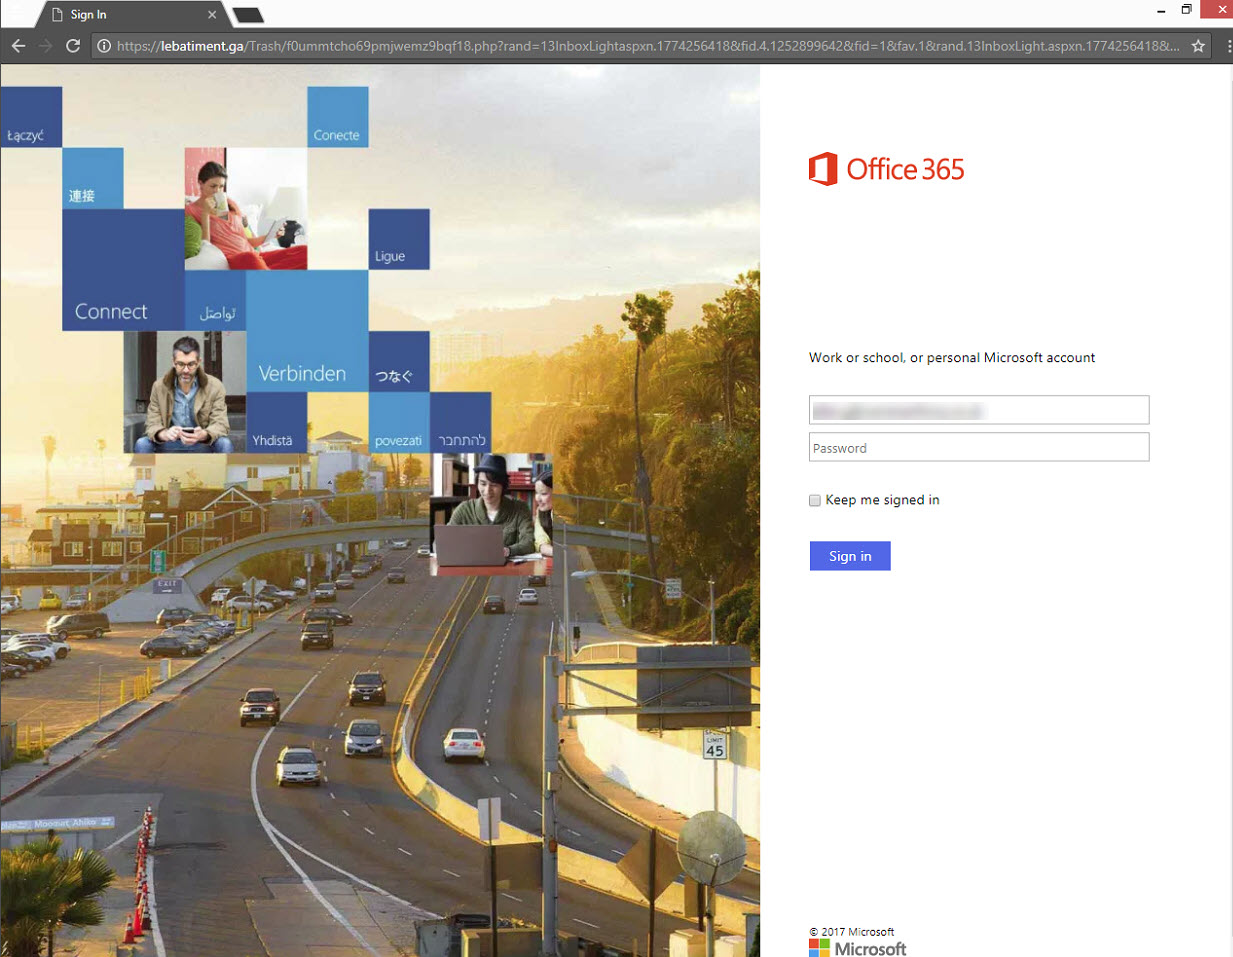 Beware of the Office 365 login page phishing scam